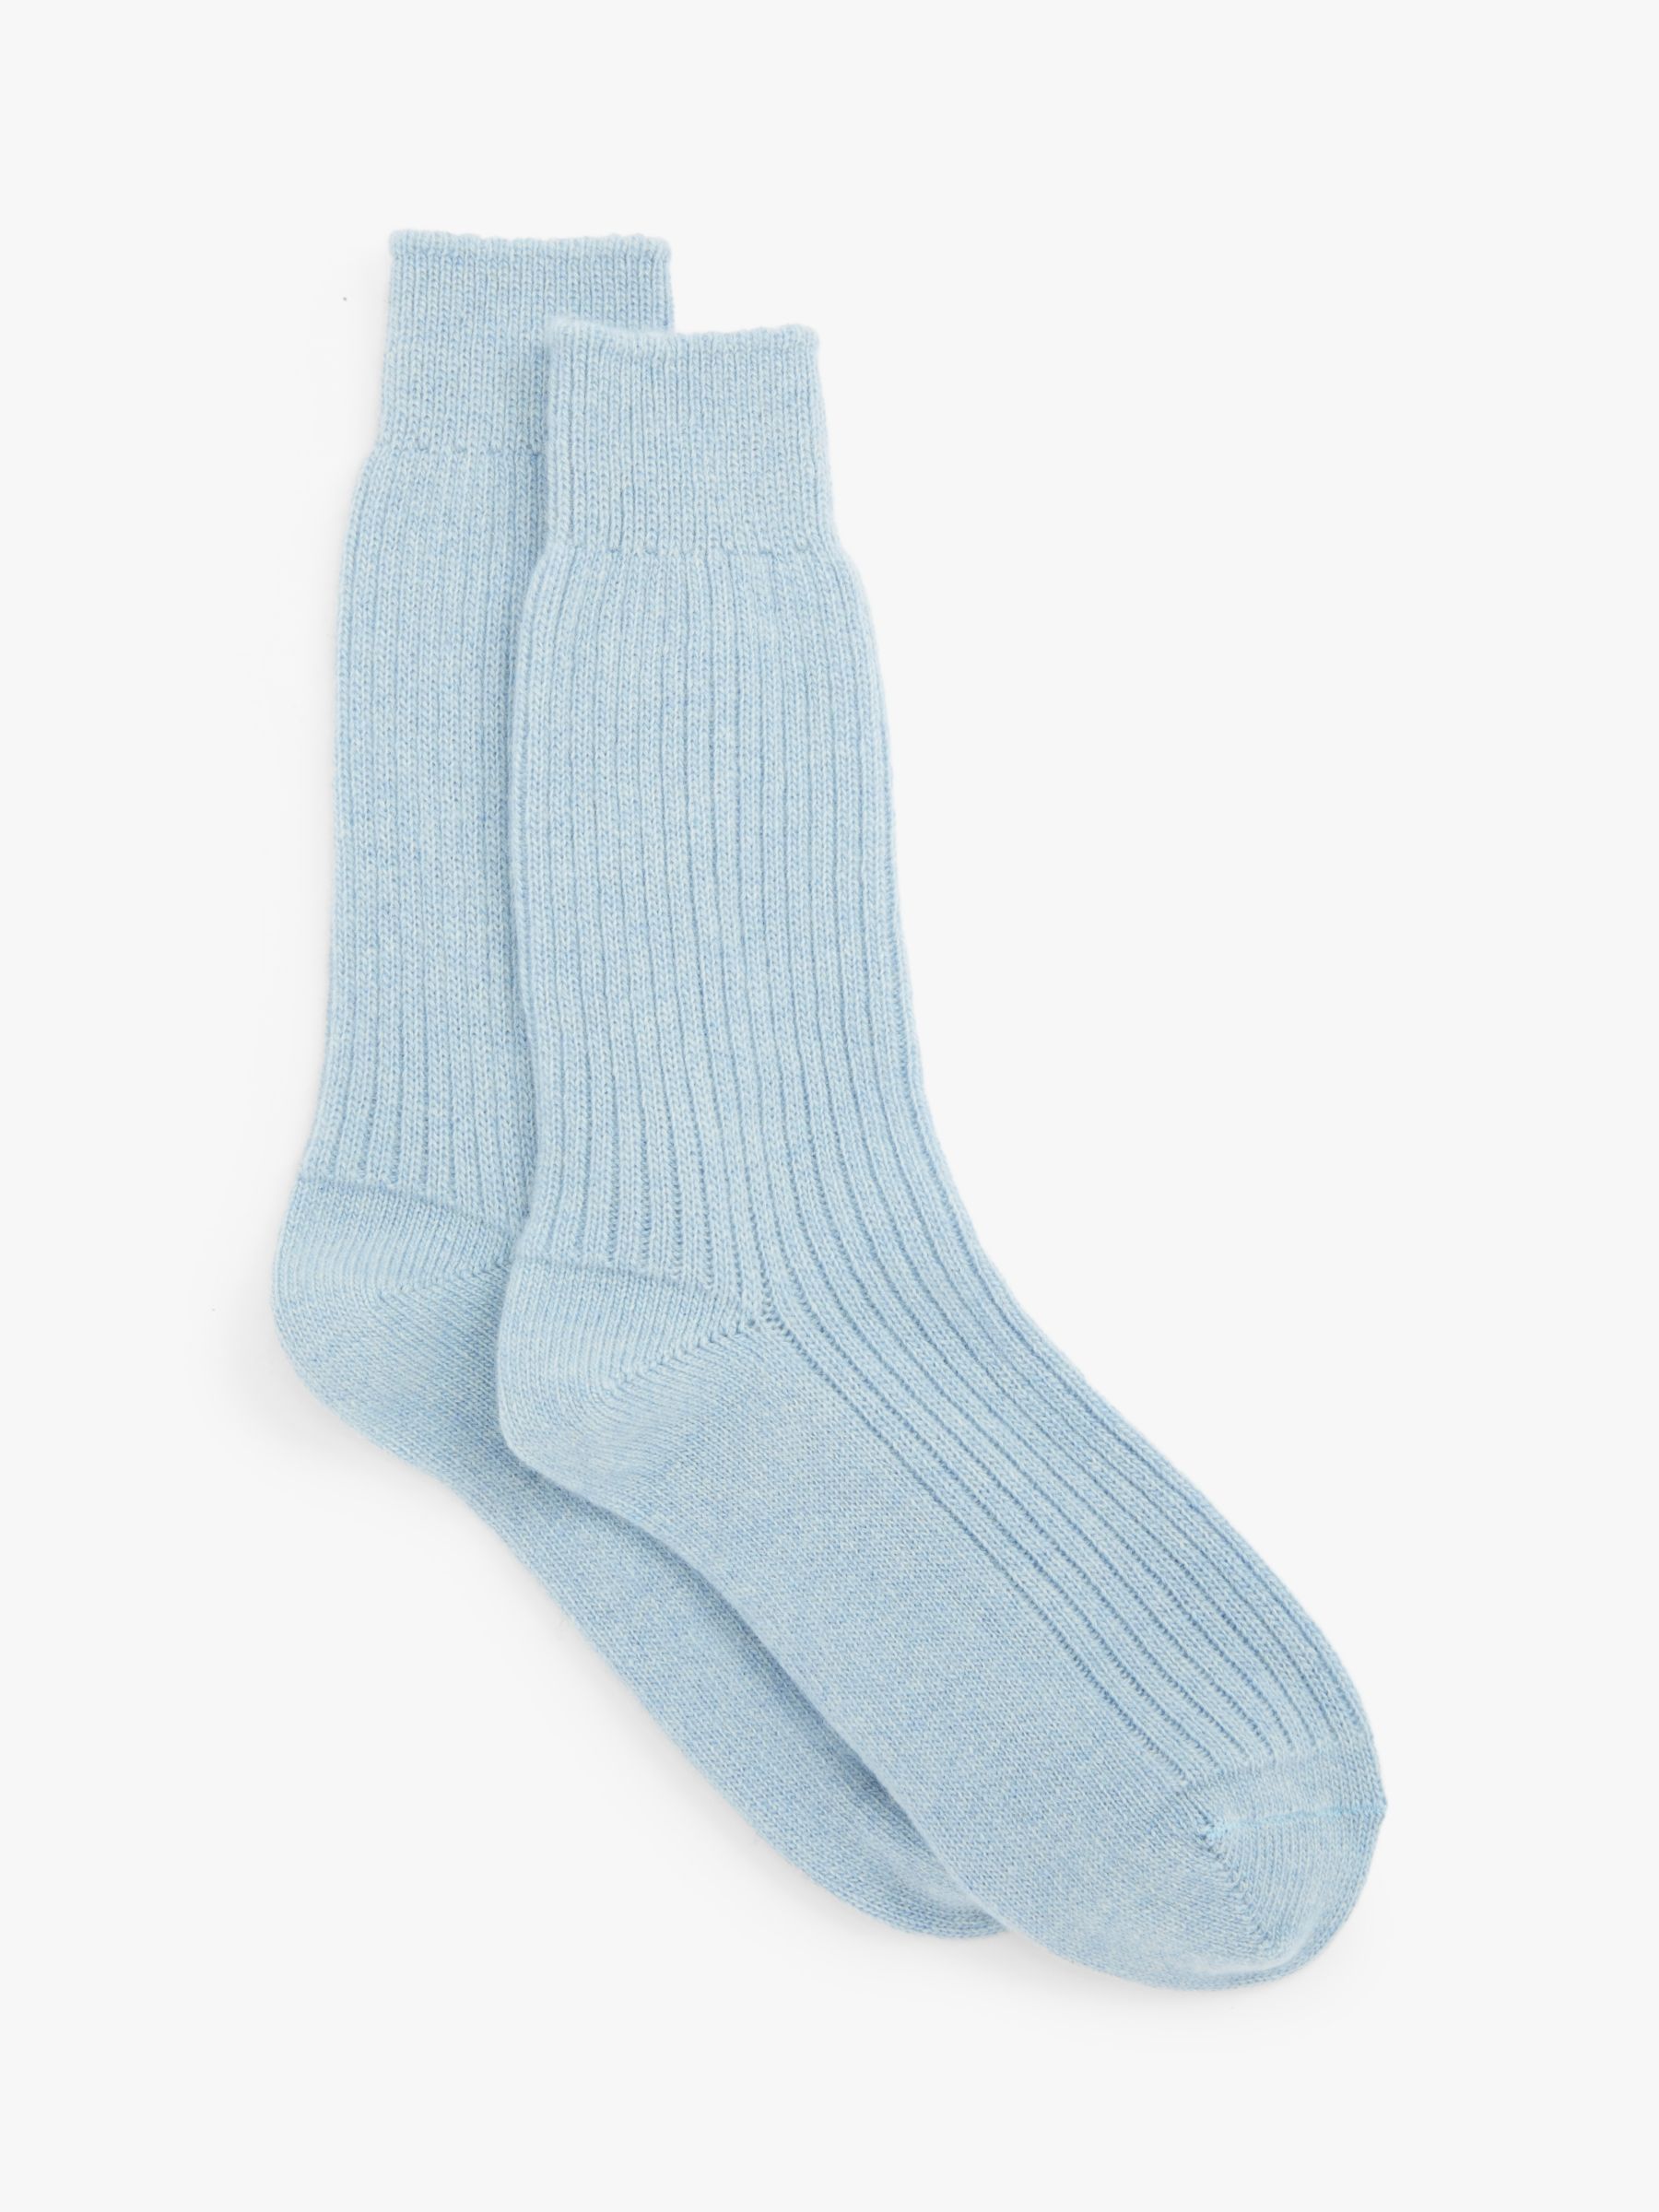 John Lewis & Partners Women's Cashmere Bed Ankle Socks, Blue Marl at ...